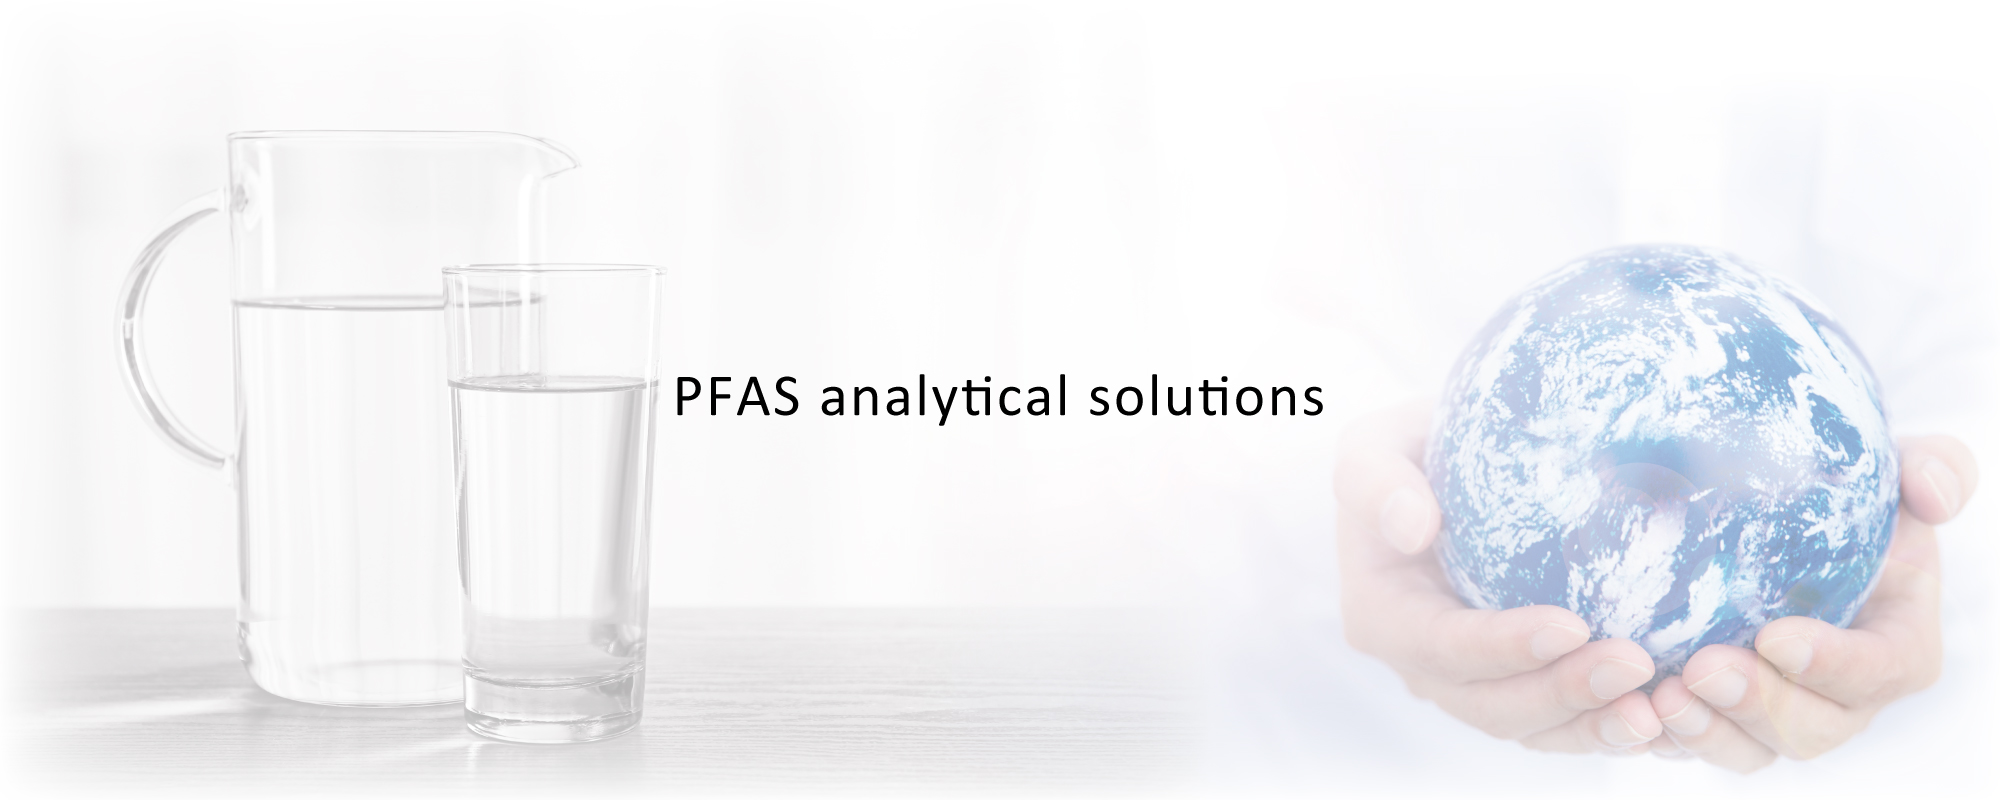 PFAS analytical solutions